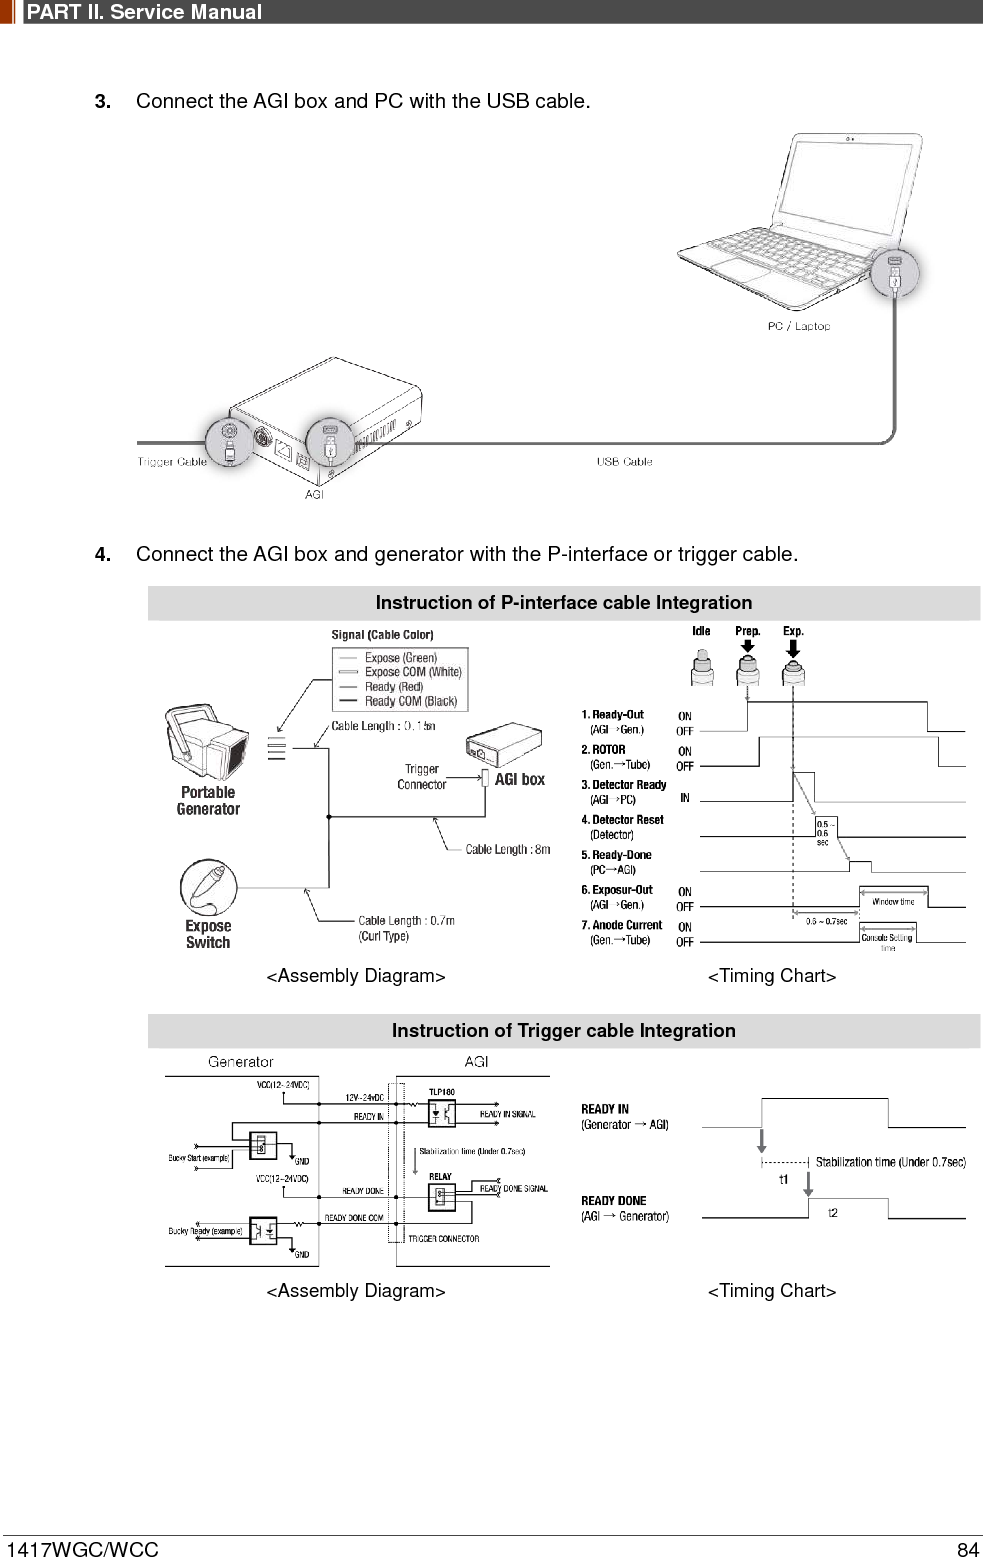 PART II. Service Manual  1417WGC/WCC 84 3. Connect the AGI box and PC with the USB cable.            4. Connect the AGI box and generator with the P-interface or trigger cable. Instruction of P-interface cable Integration   &lt;Assembly Diagram&gt; &lt;Timing Chart&gt;  Instruction of Trigger cable Integration   &lt;Assembly Diagram&gt; &lt;Timing Chart&gt;    